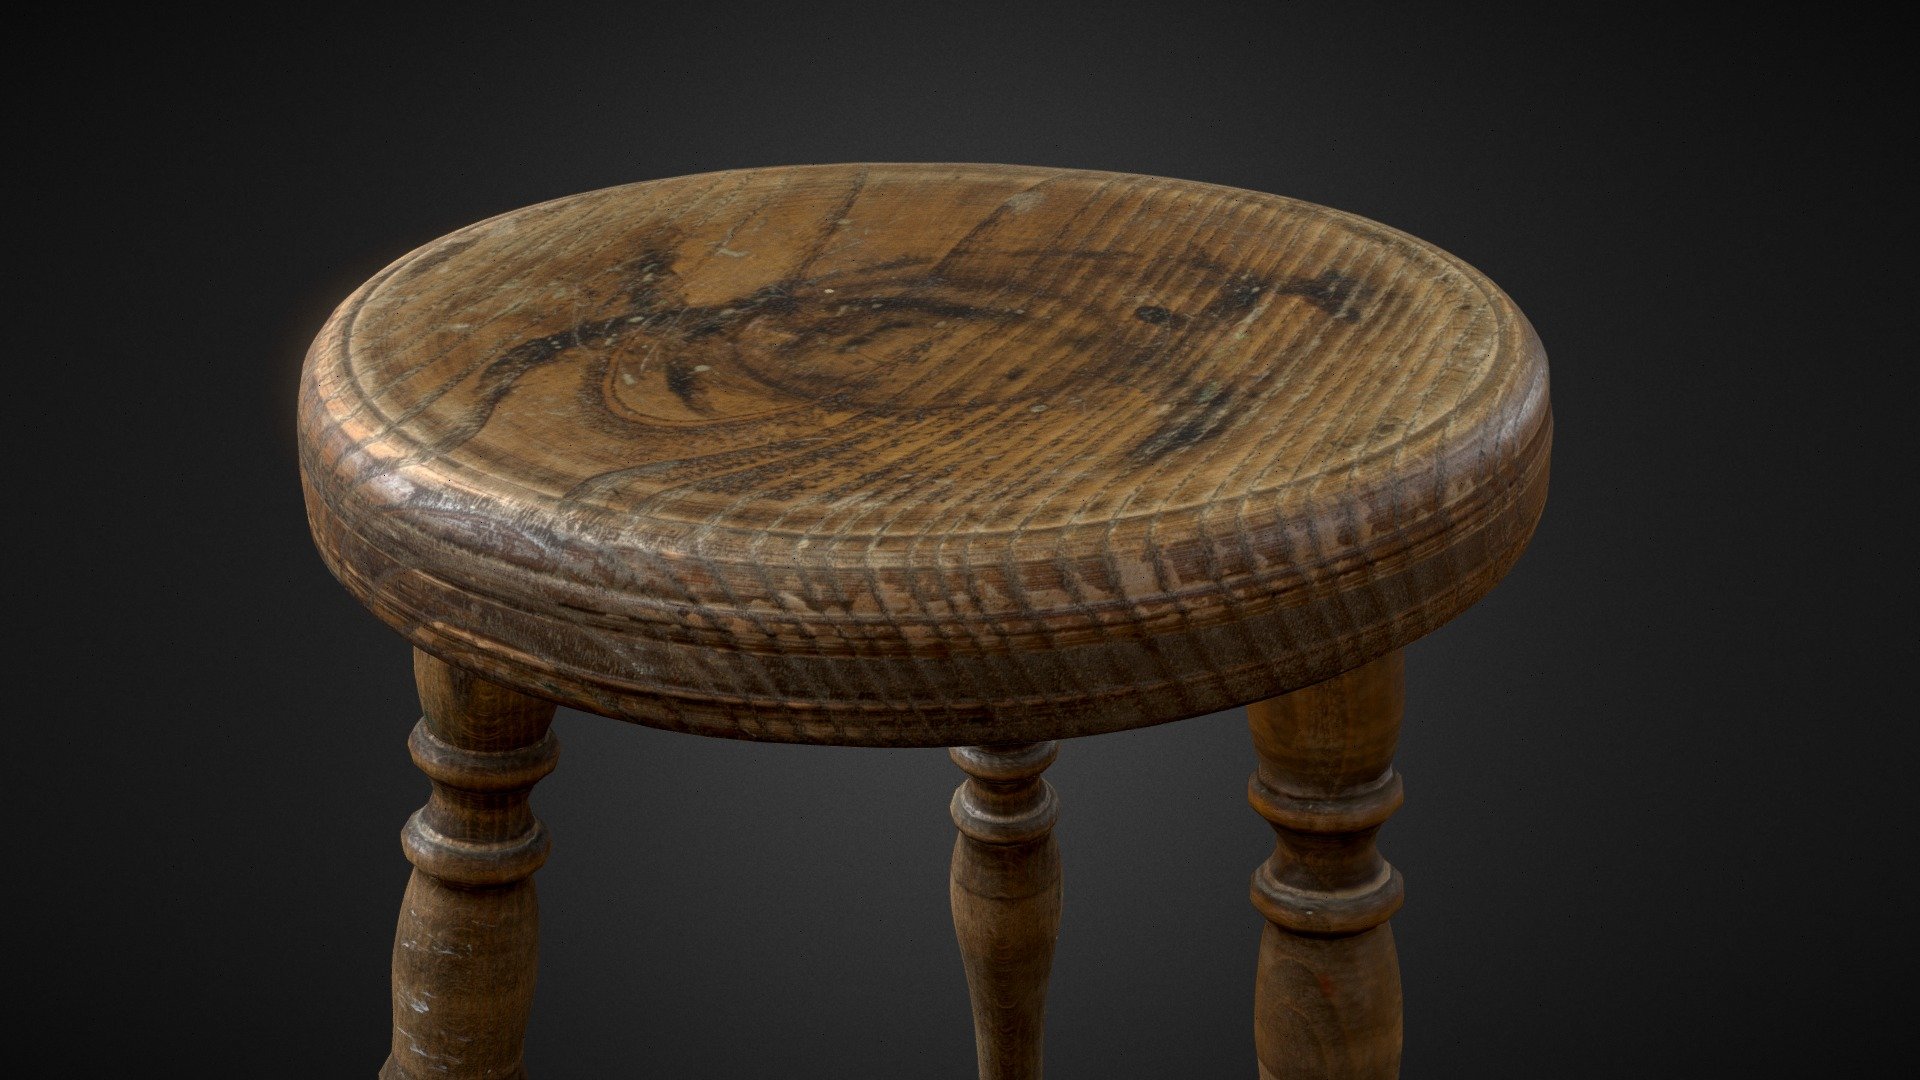 3D scan of this realistic looking Old Stool, all shot with cross-polarized technique for true albedo.

Great for scenes such as: interior, outdoor decoration, old town....

Quads only (Fast loading, and economic mesh)
8K Textures: Base Color, Normal, Height, Roughness, Specular - Old Stool - 3D model by Reality Scanning (@realityscanning) 3d model